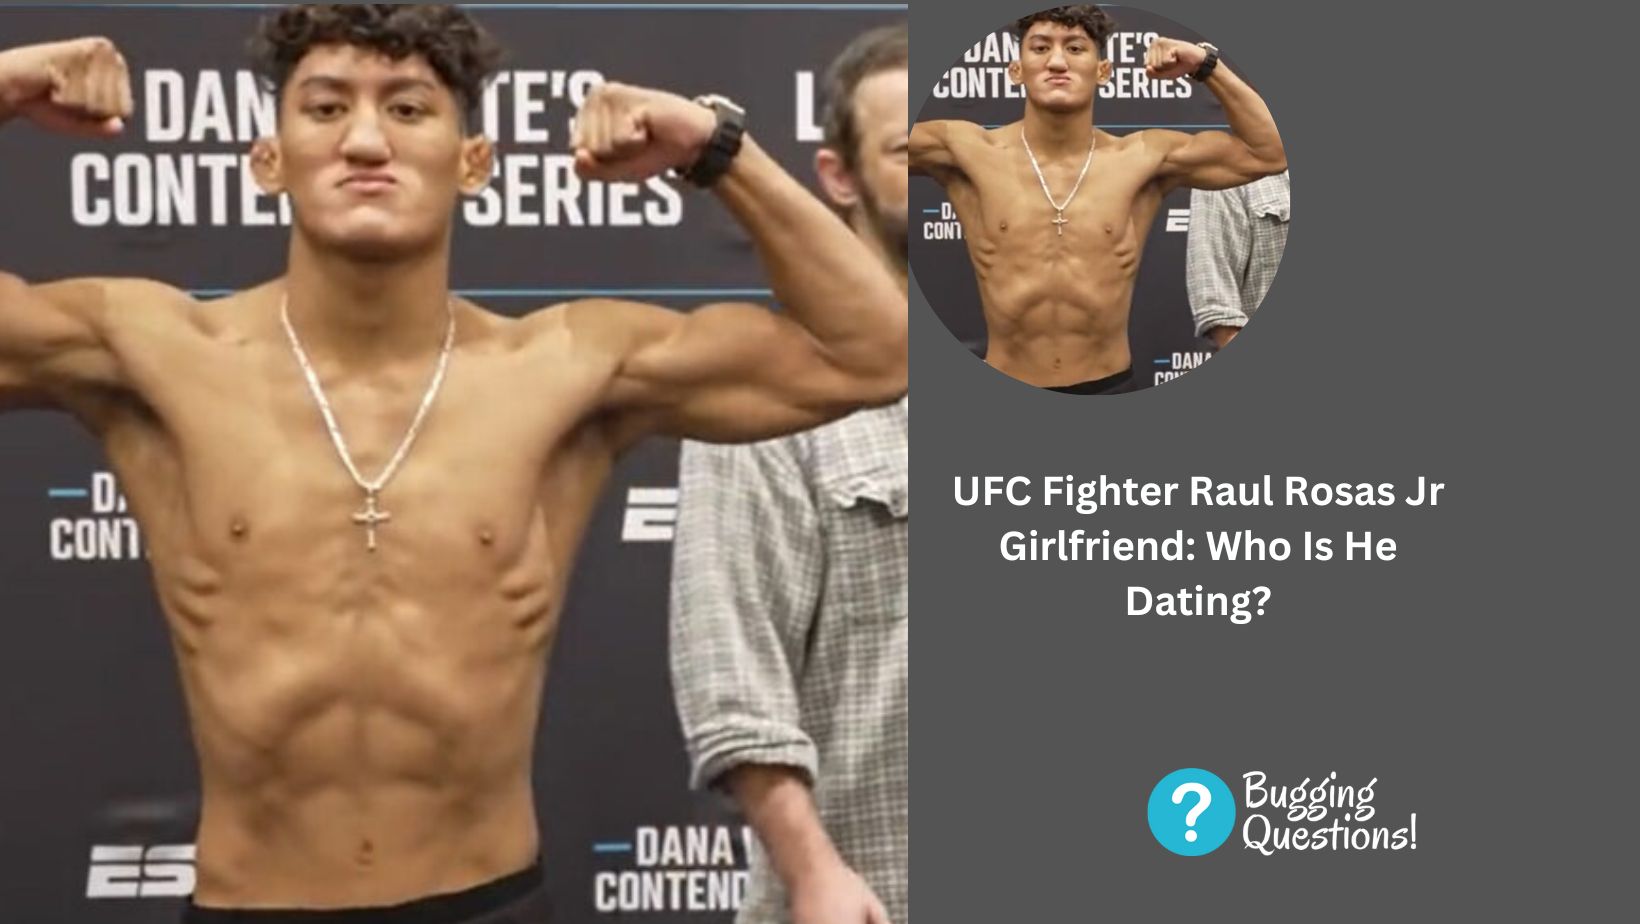 UFC Fighter Raul Rosas Jr Girlfriend: Who Is He Dating?